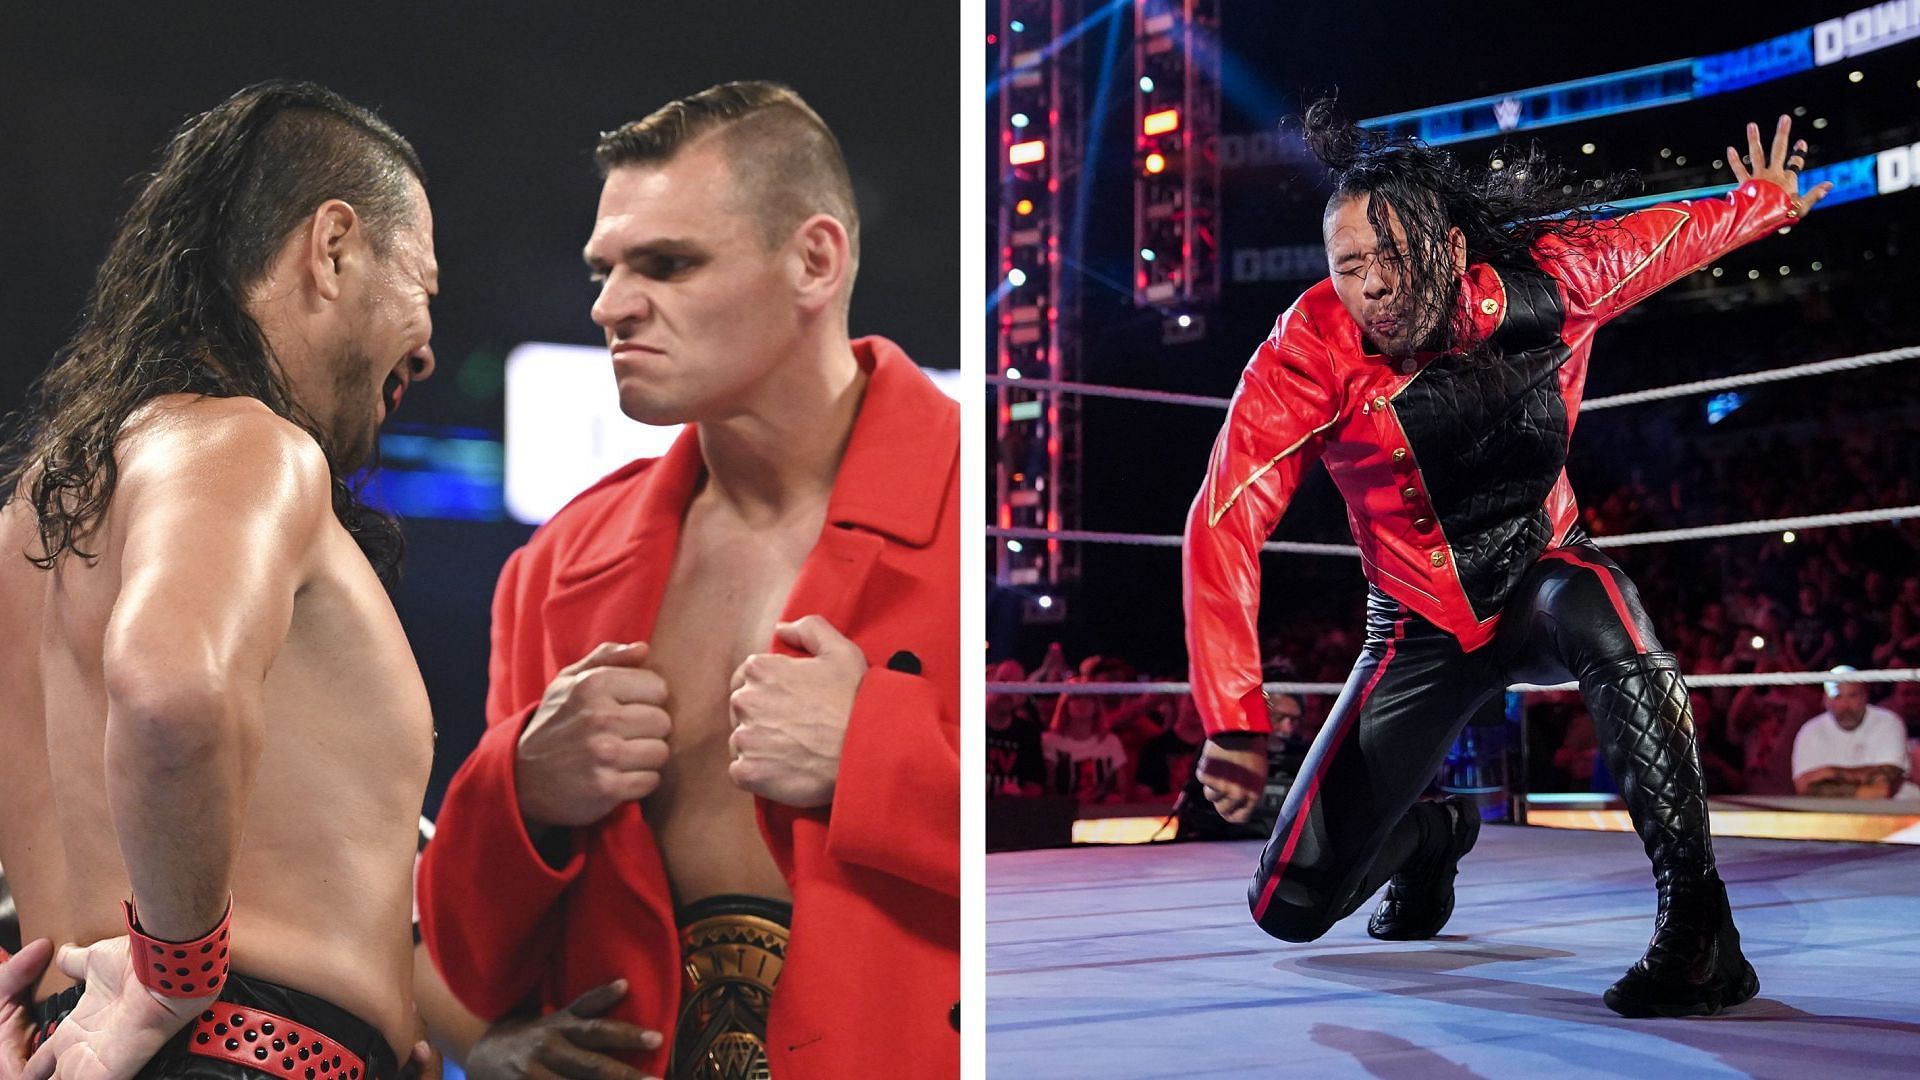 Shinsuke Nakamura and Gunther are set to go at it on WWE SmackDown